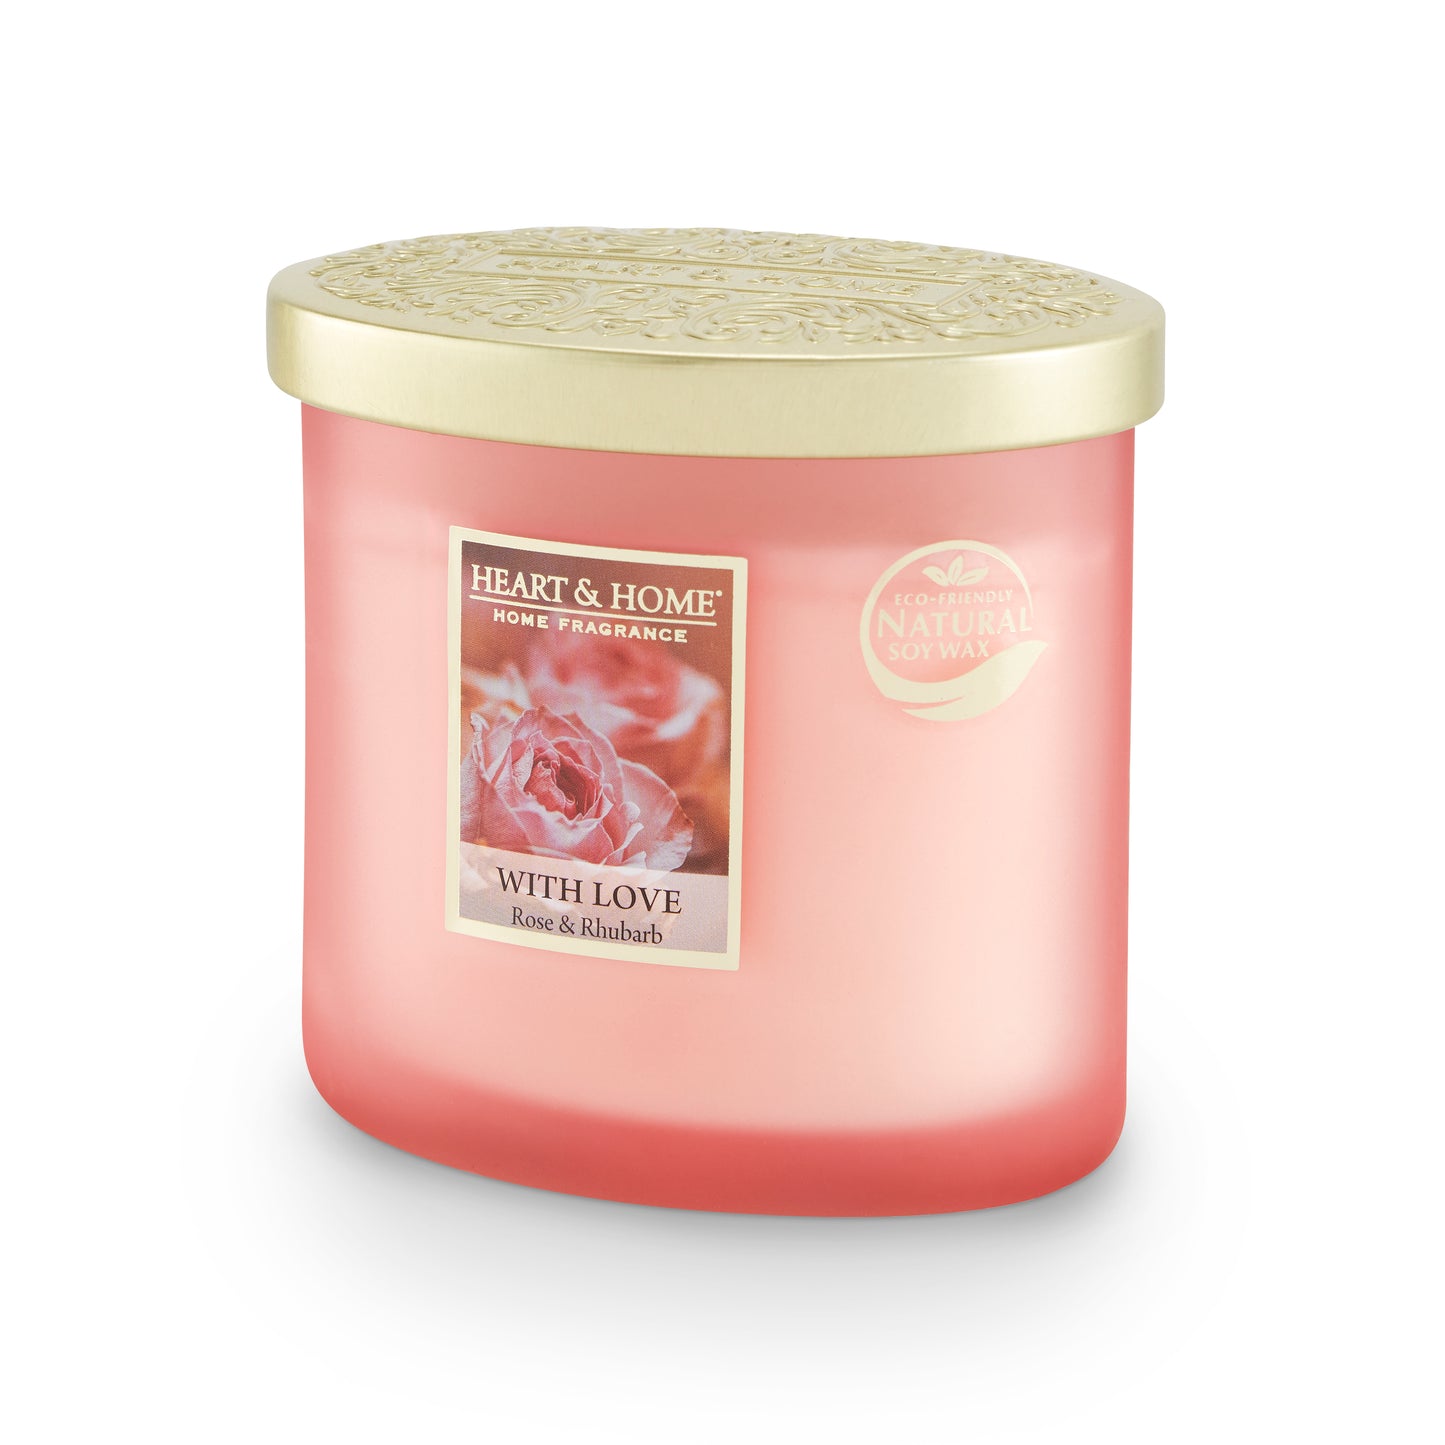 Rose & Rhubarb With Love Soy Wax Candle Love In Bloom! Candle Gift Idea